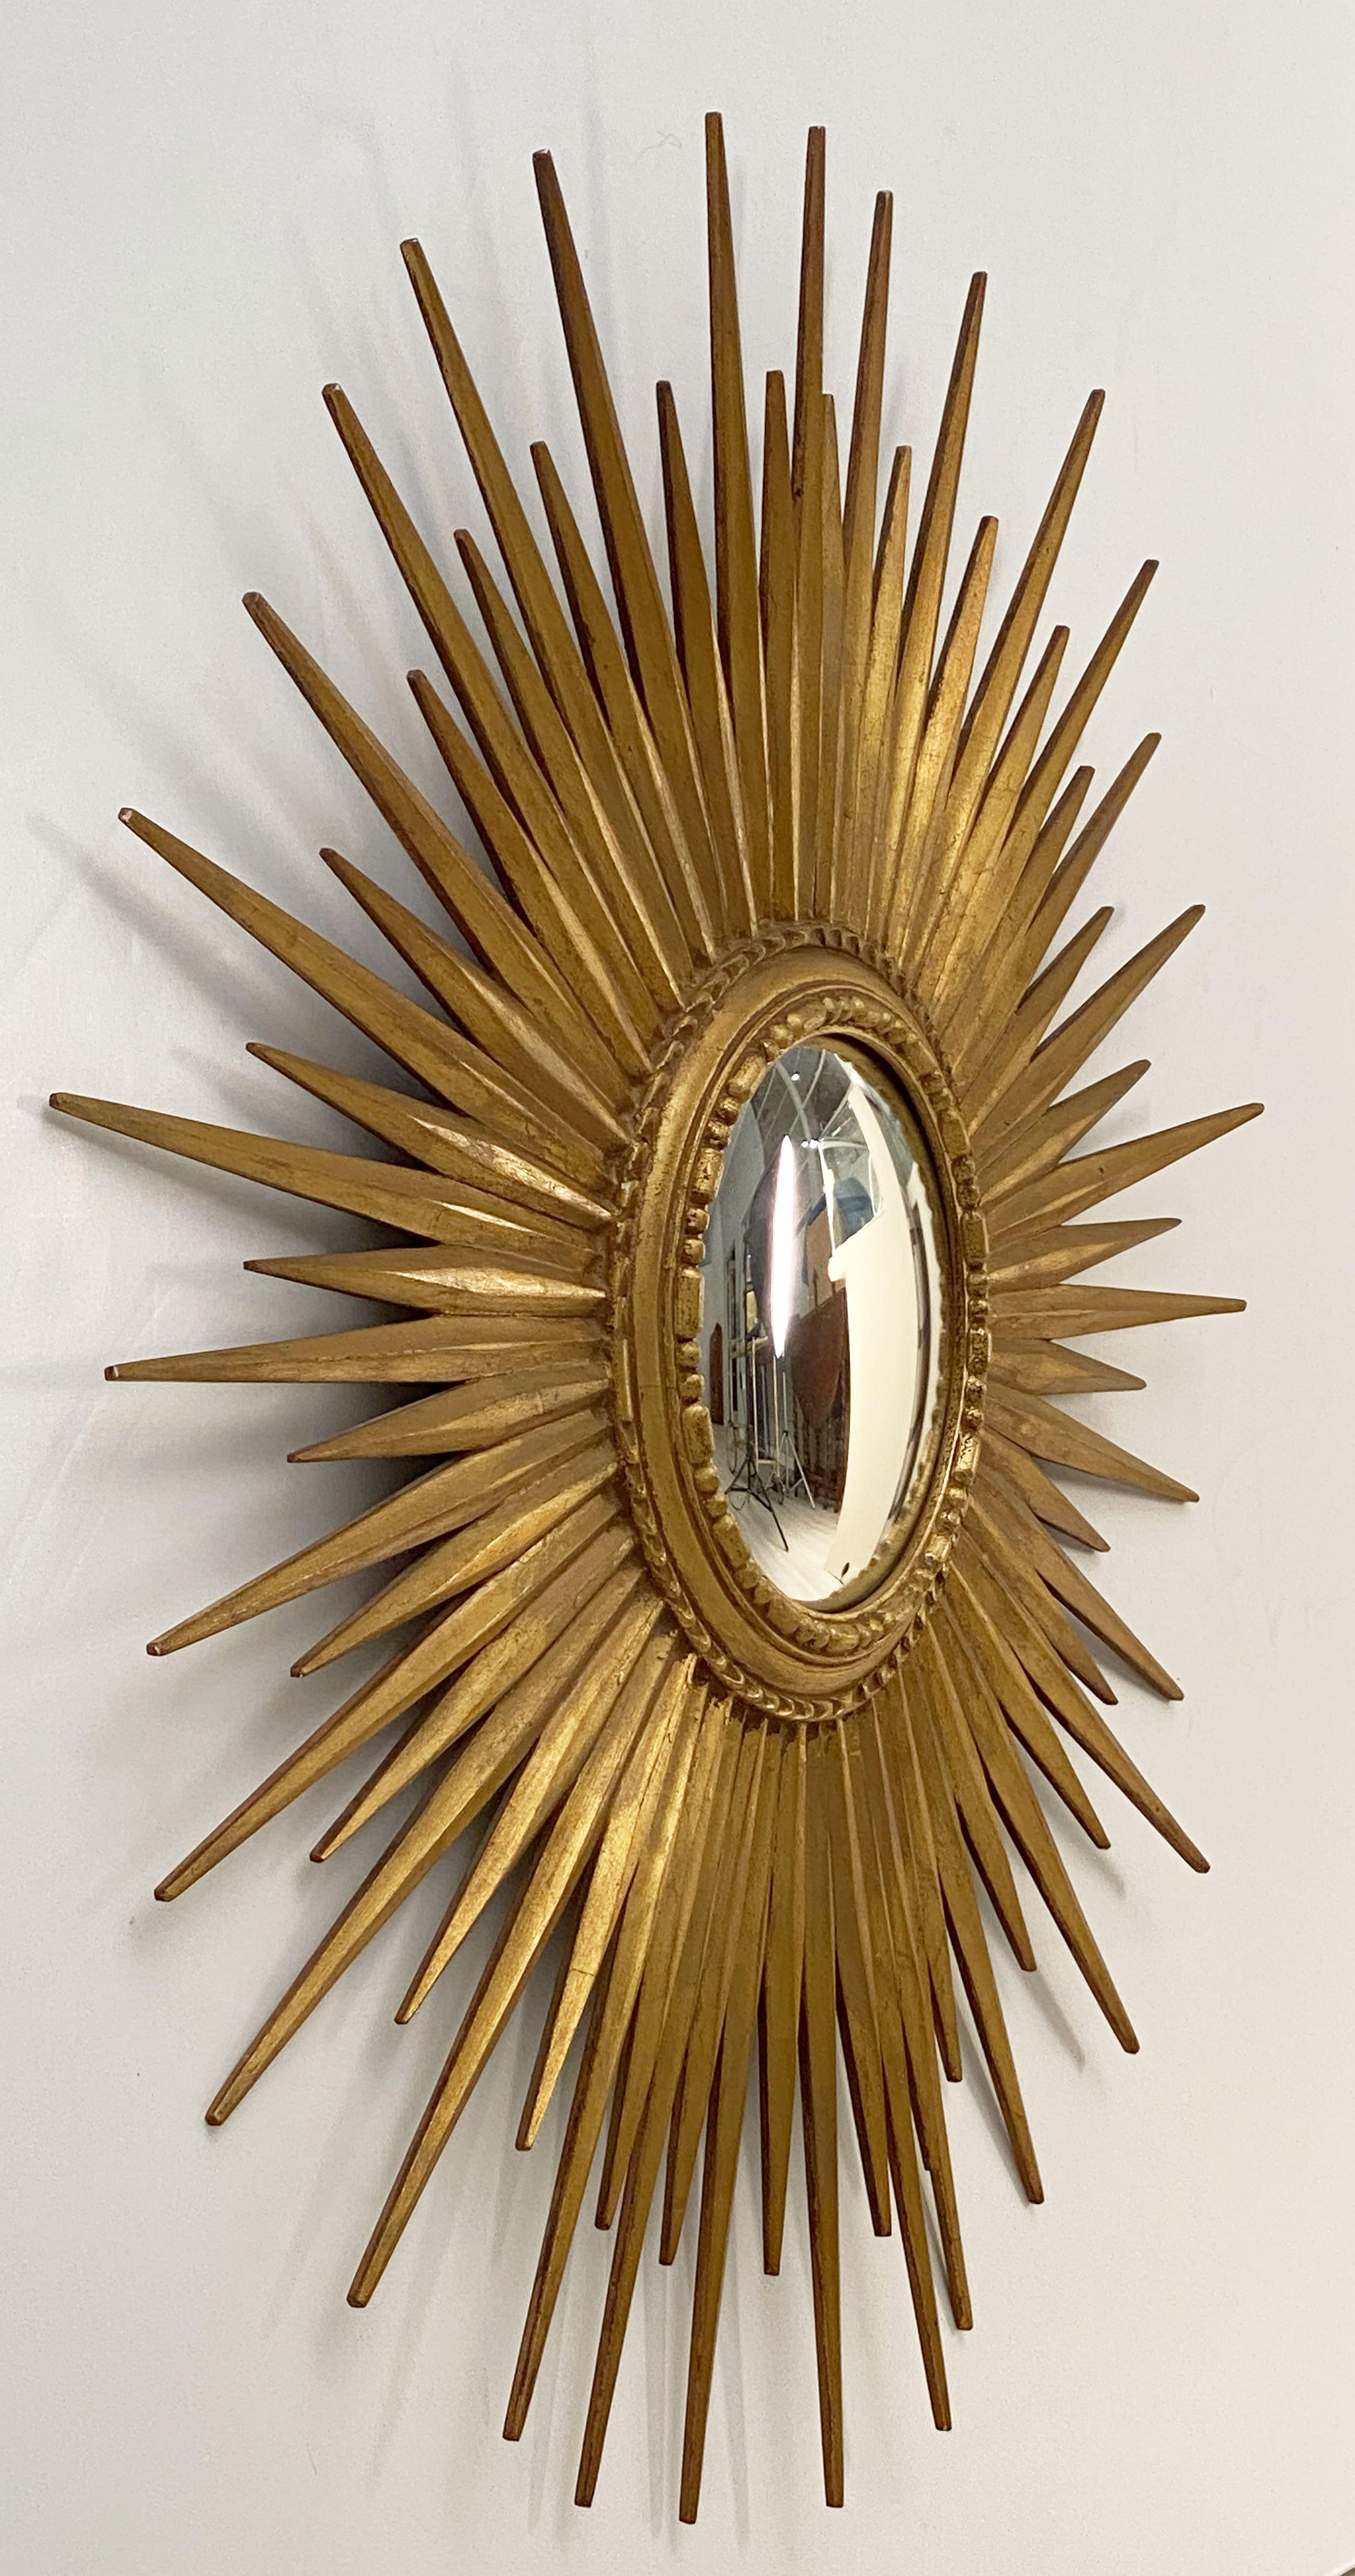 A lovely Belgian gilt sunburst (or starburst) mirror, 32 inches diameter, with a round, convex mirrored glass center in moulded frame. 
Far reaching undulating dramatic rays arranged around the original convex mirror plate, circa 1950.